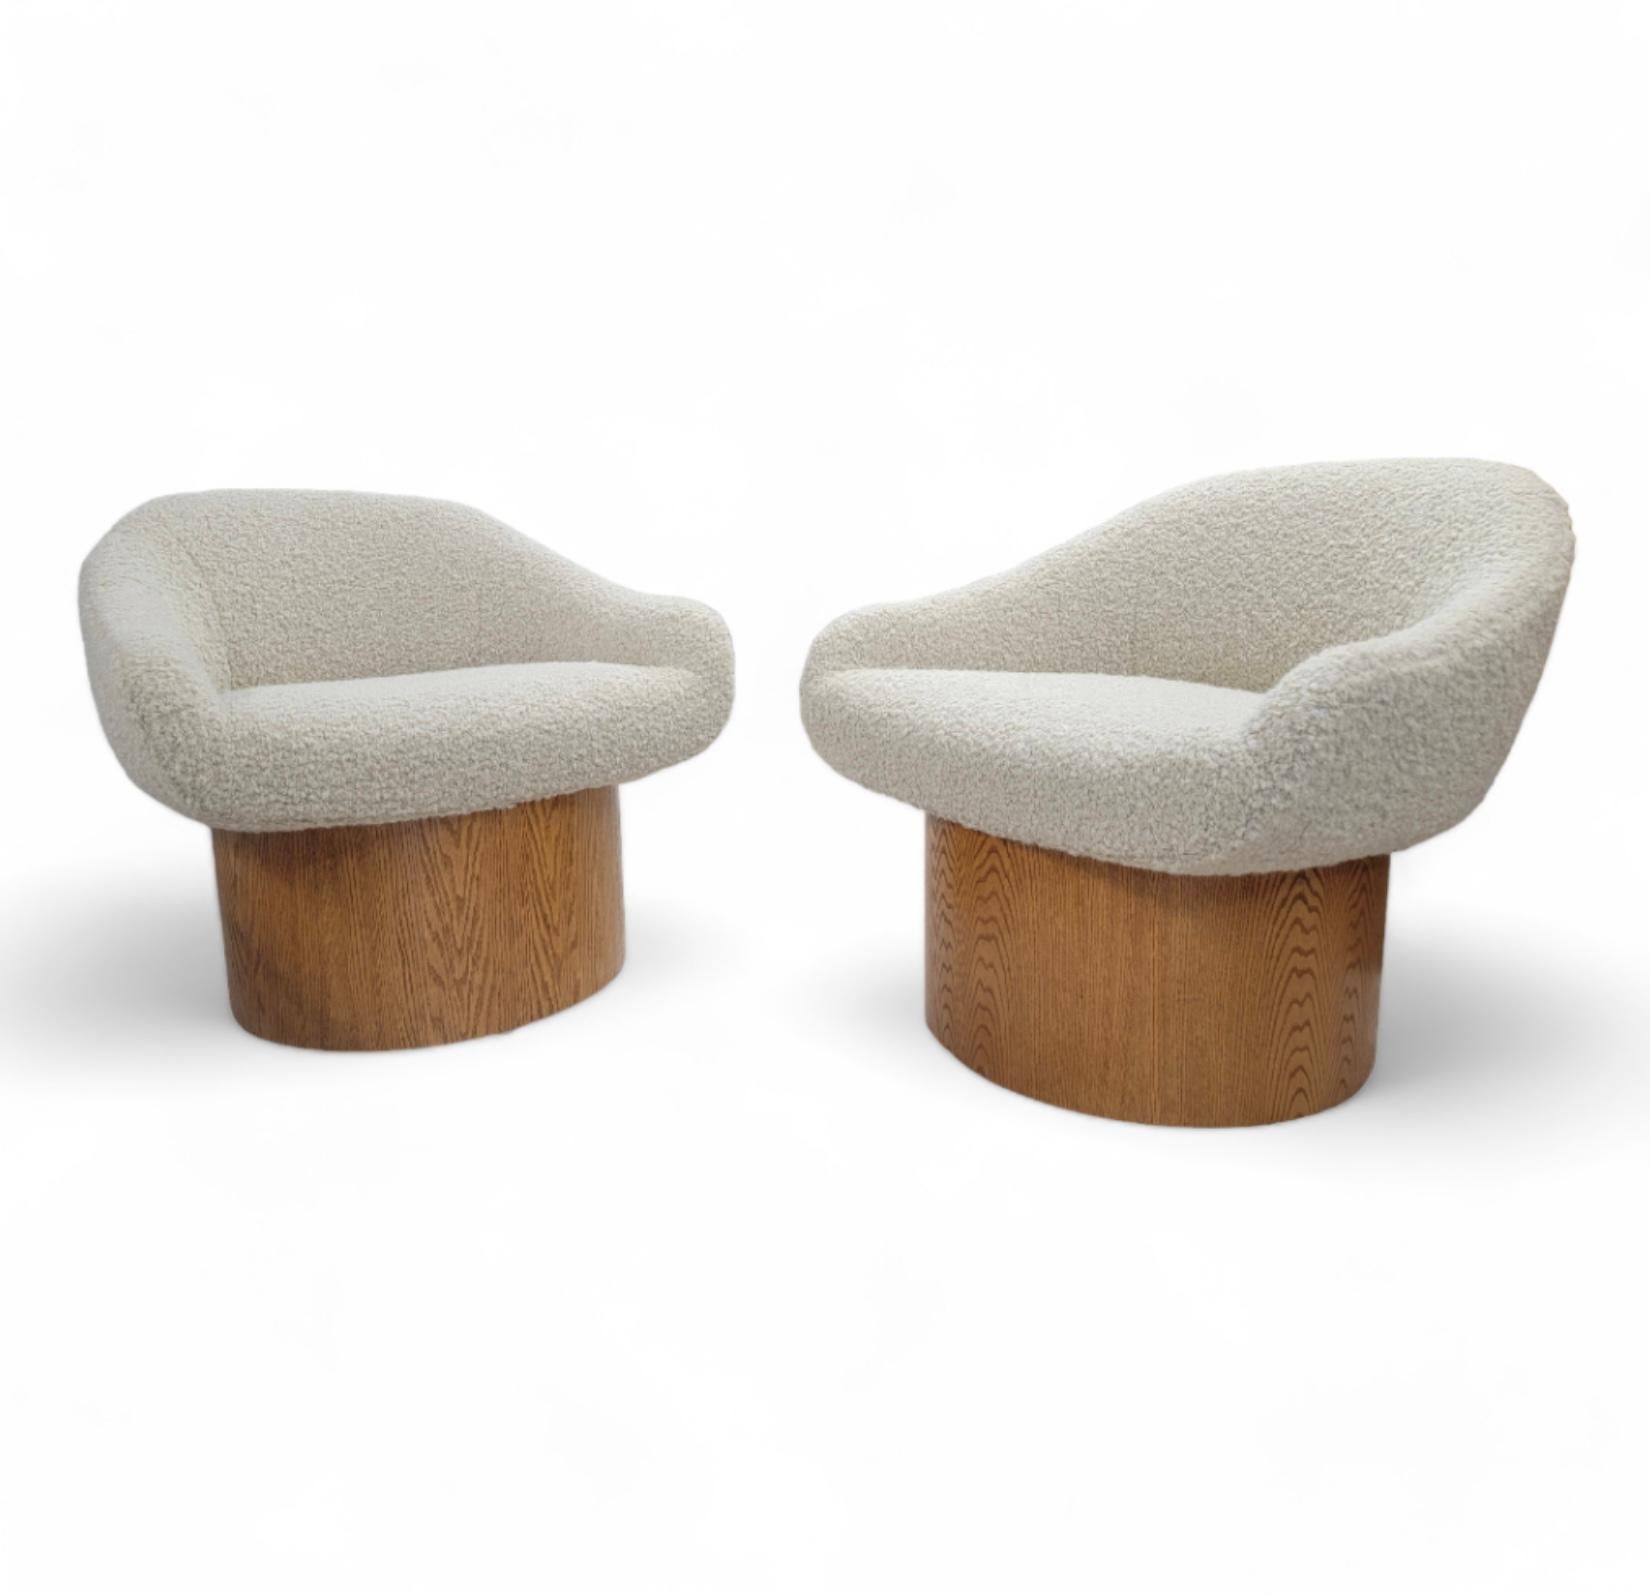 Hand-Crafted Vintage Modern Milo Baughman Style Barrel Lounges Upholstered in Boucle - Pair